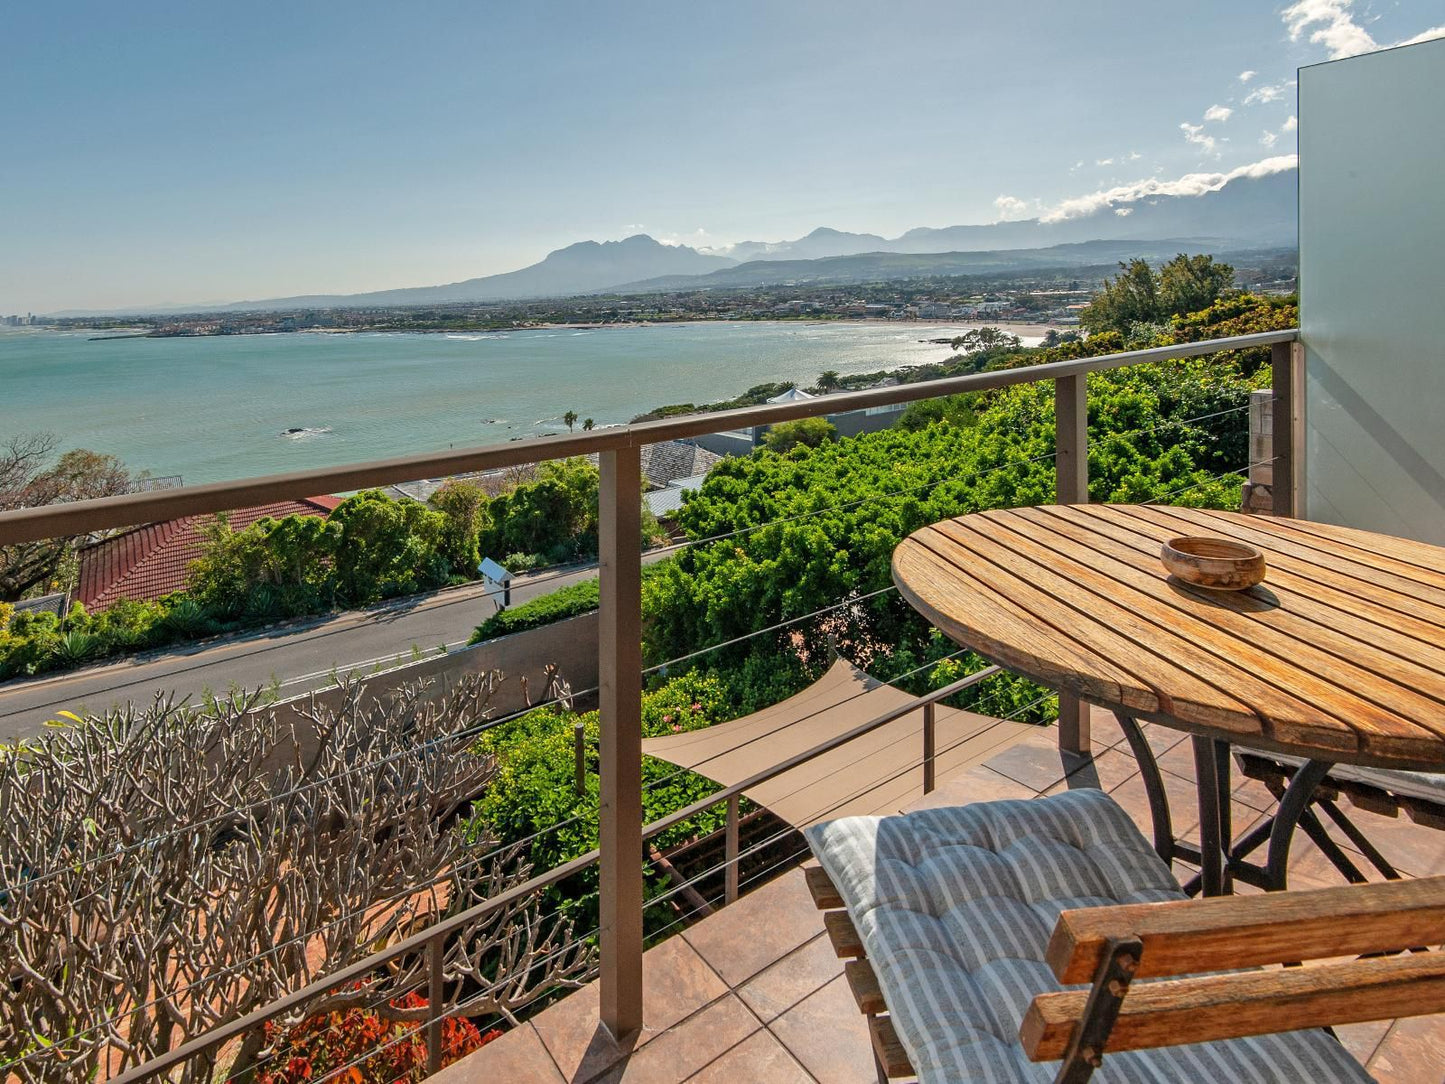 18 On Kloof Guest House Gordons Bay Western Cape South Africa Balcony, Architecture, Beach, Nature, Sand